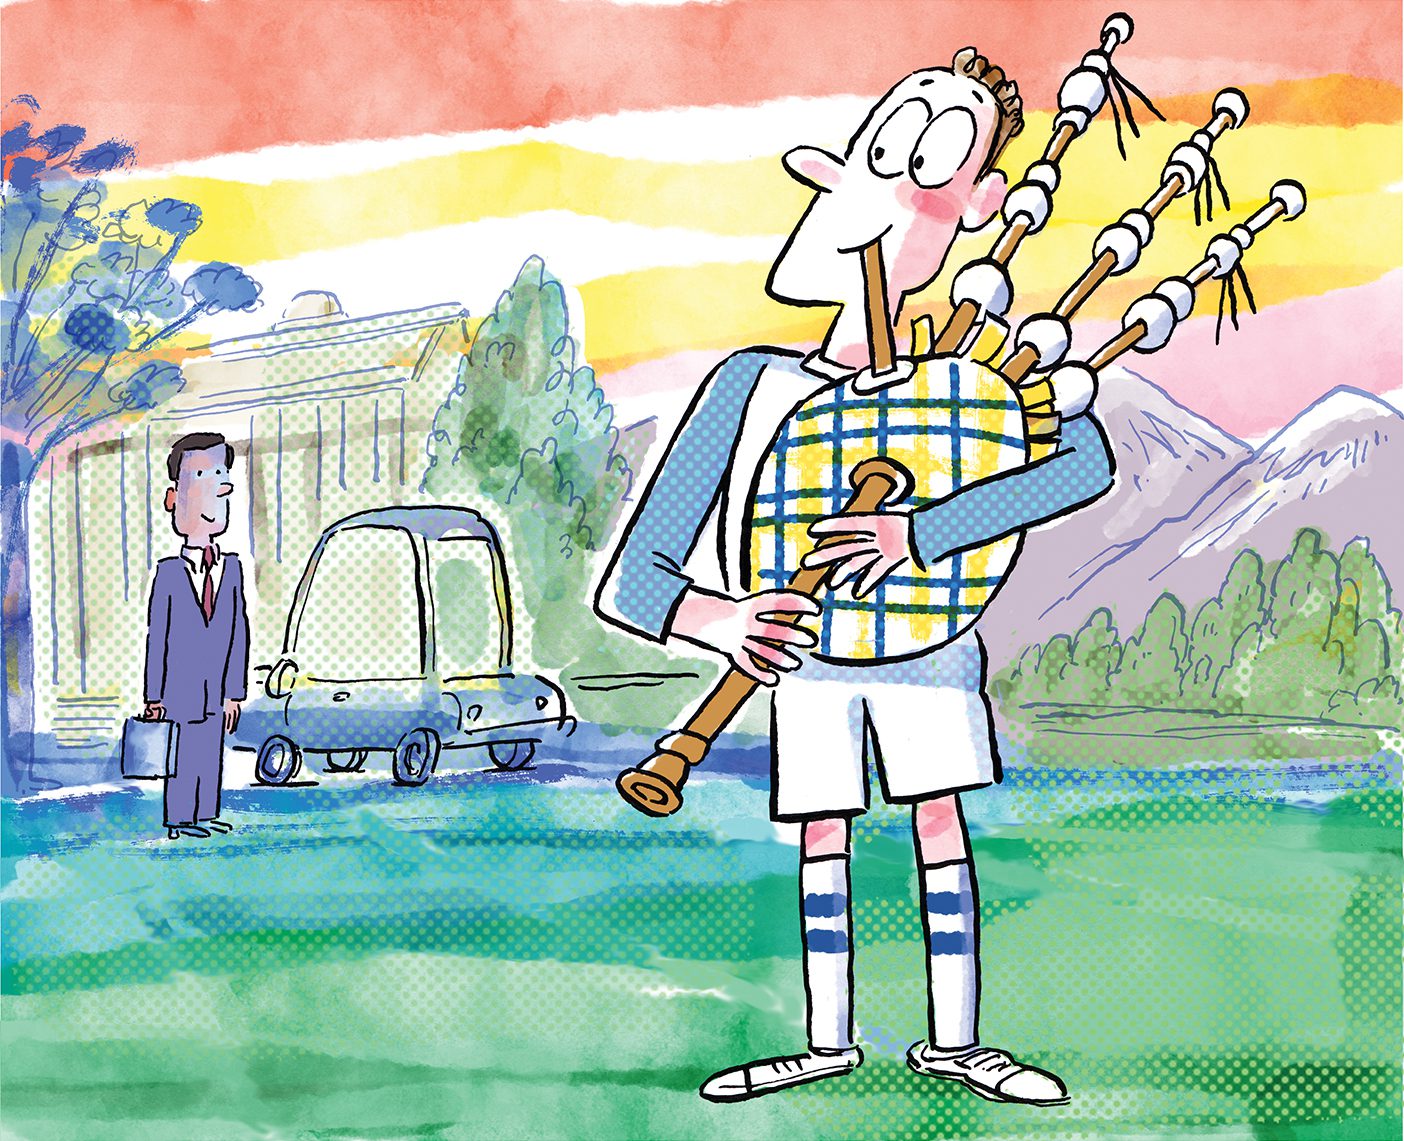 Cartoon illustration of a bagpiper playing on the south end of campus. A man in a dark suit listens from a distance.